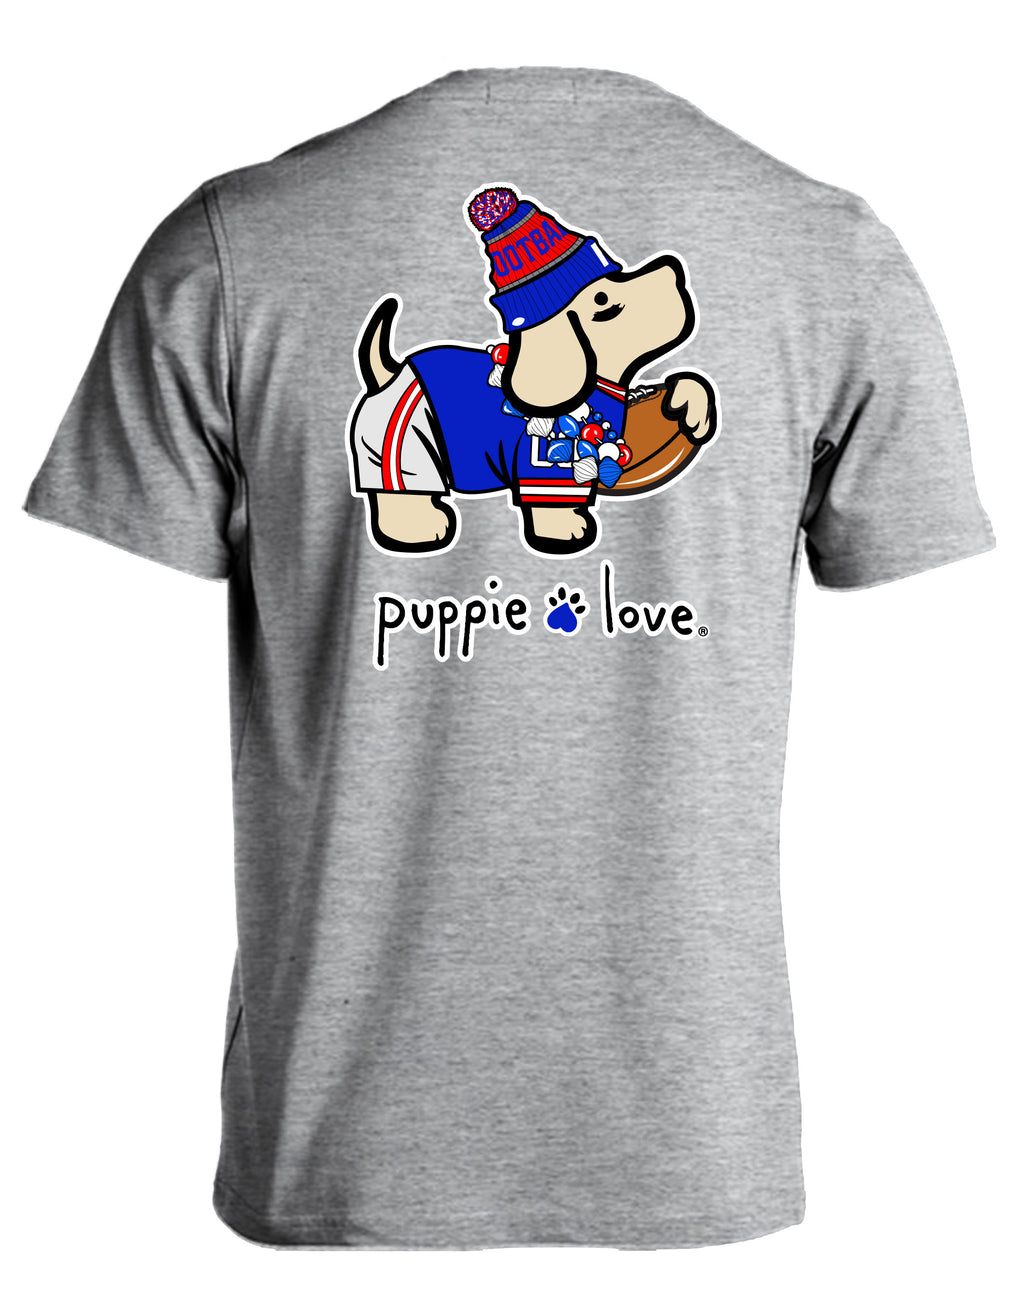 BLUE, RED, AND WHITE MASCOT PUP - Puppie Love